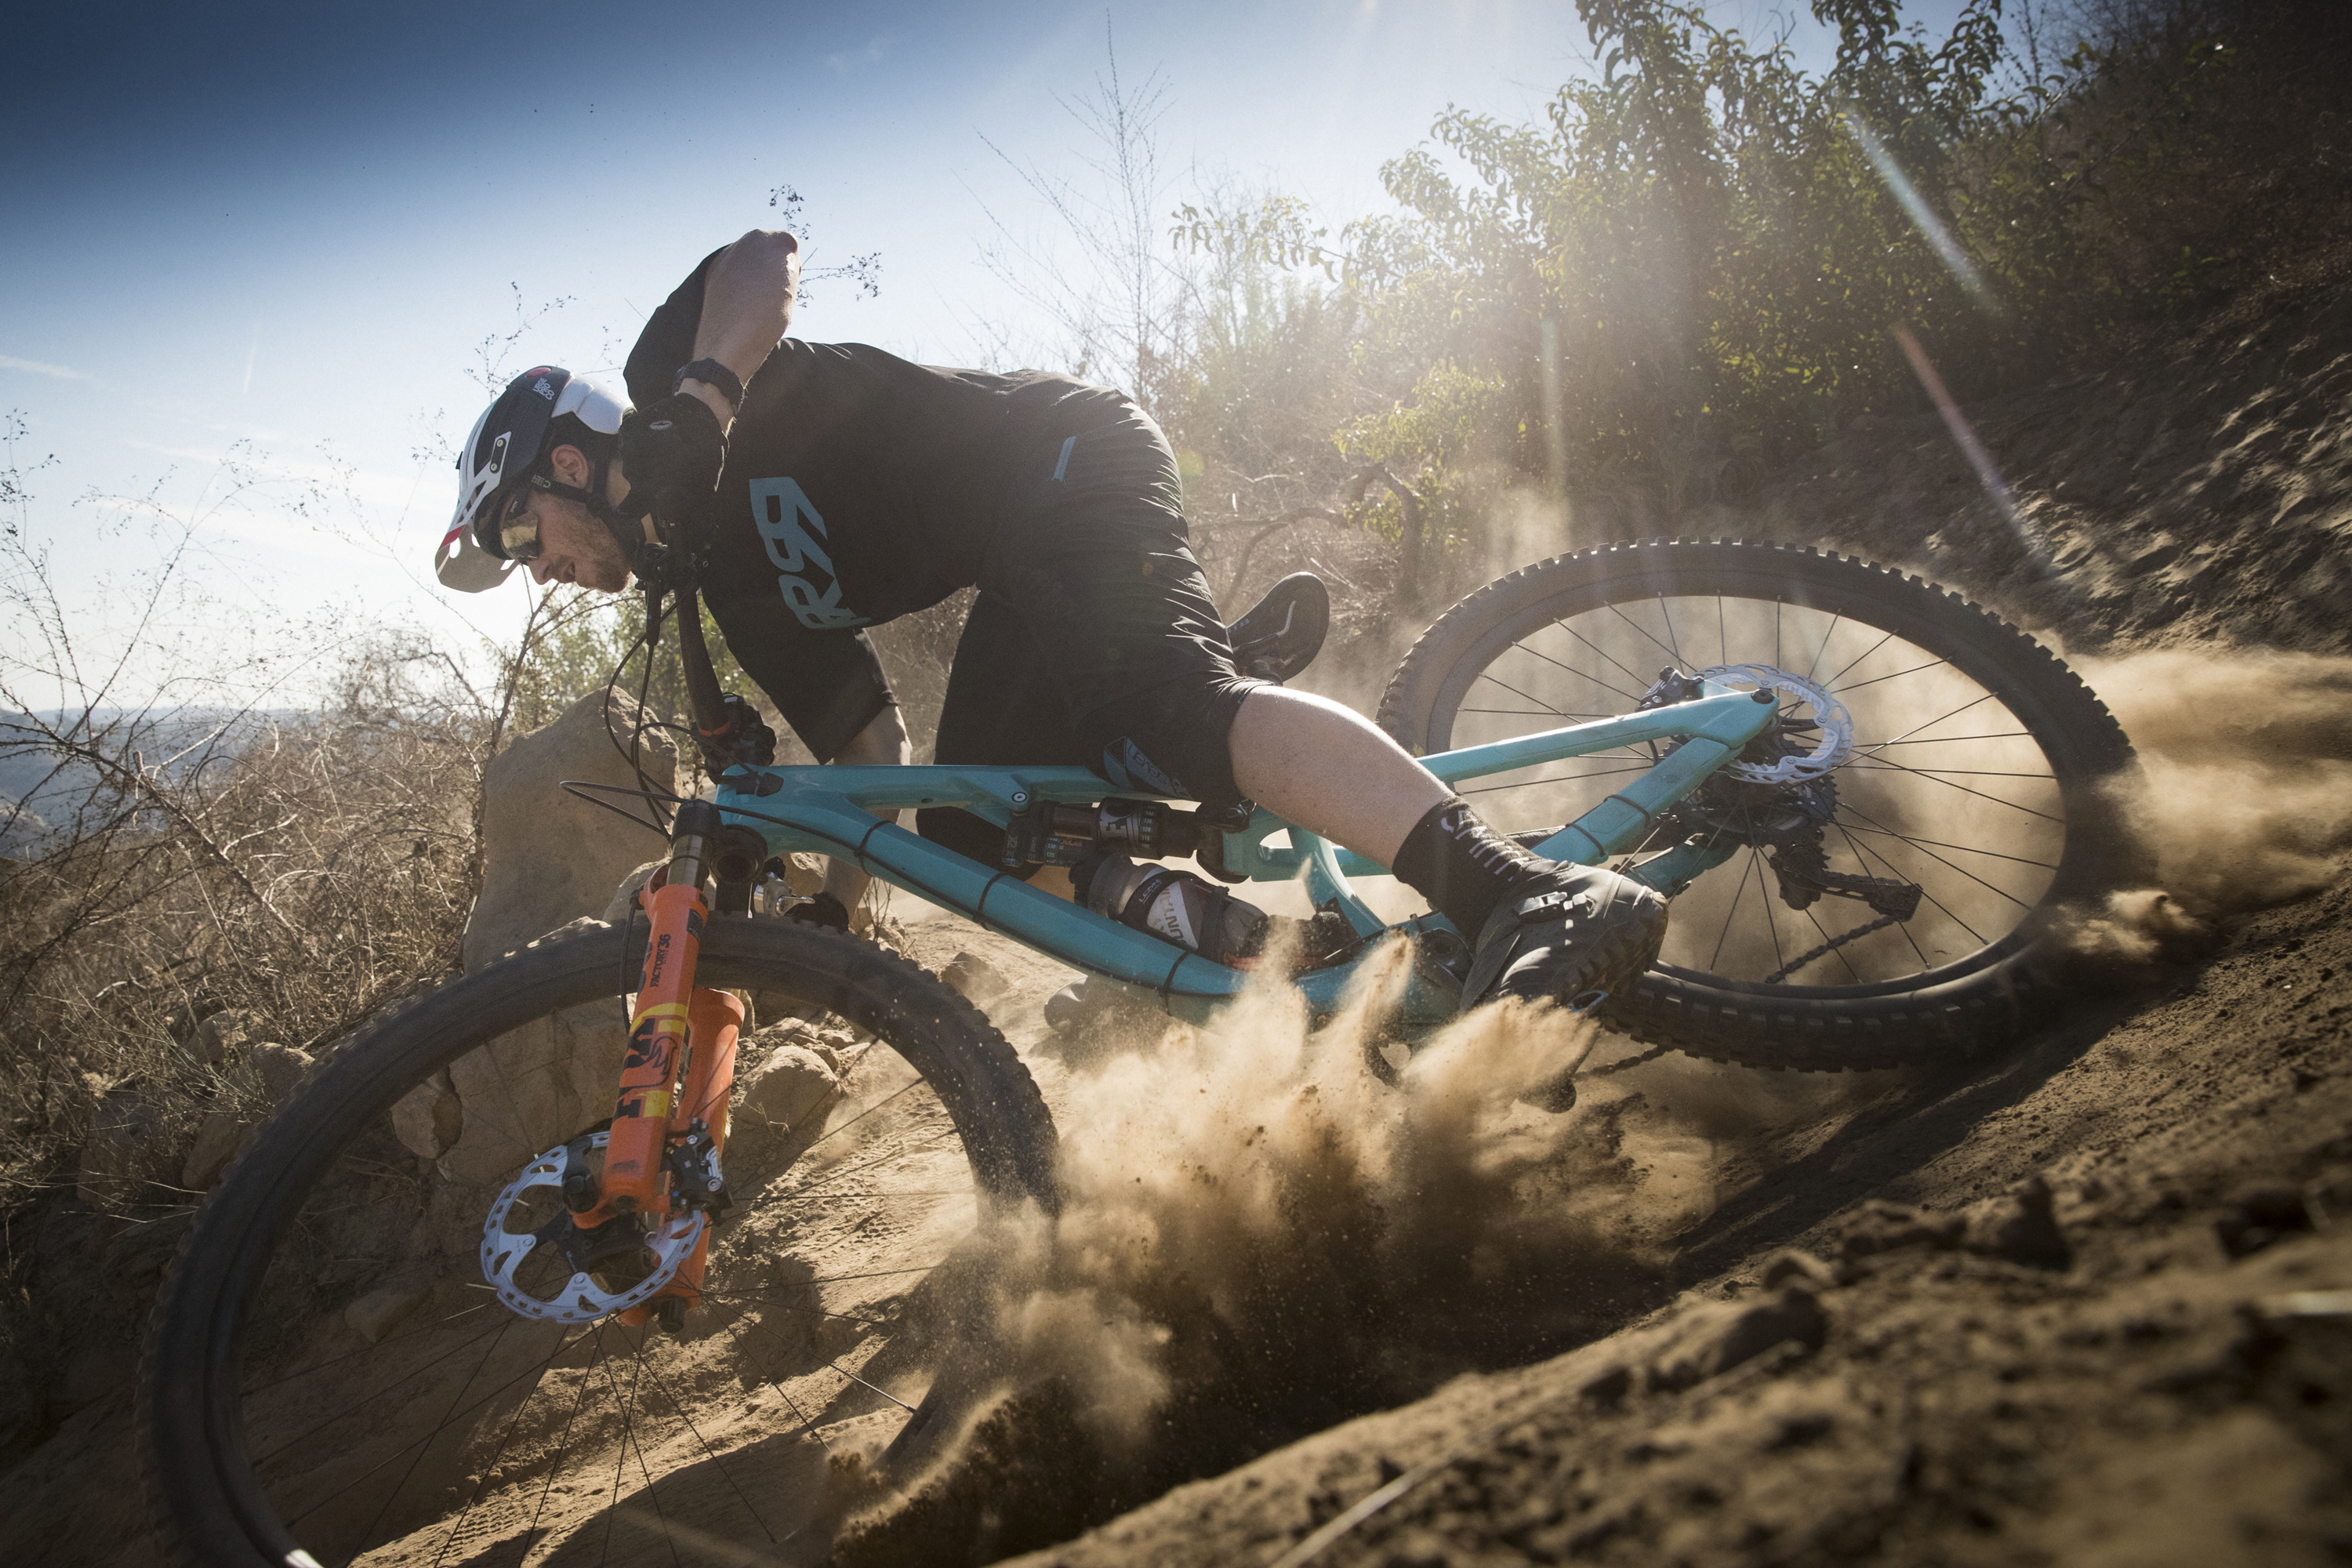 Jessie Melamed ripping a soft corner on his Shimano equipped mountain bike